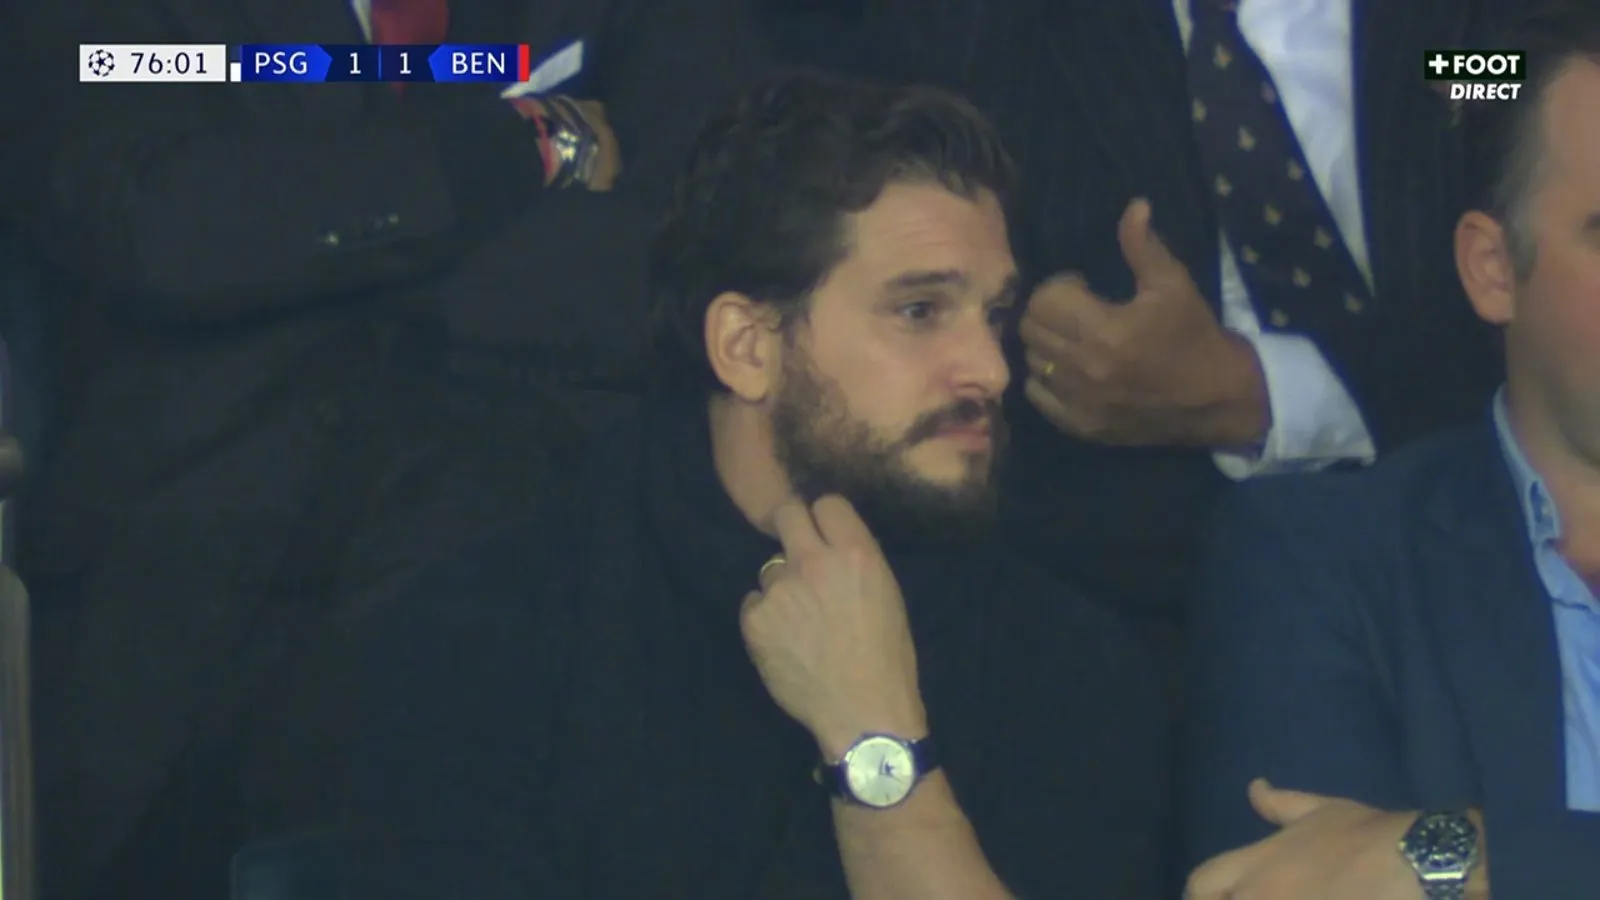 Kit Harington shows up at Paris Saint-Germain home to watch UEFA Champions League and take photos with Messi & Antonella | FMV6